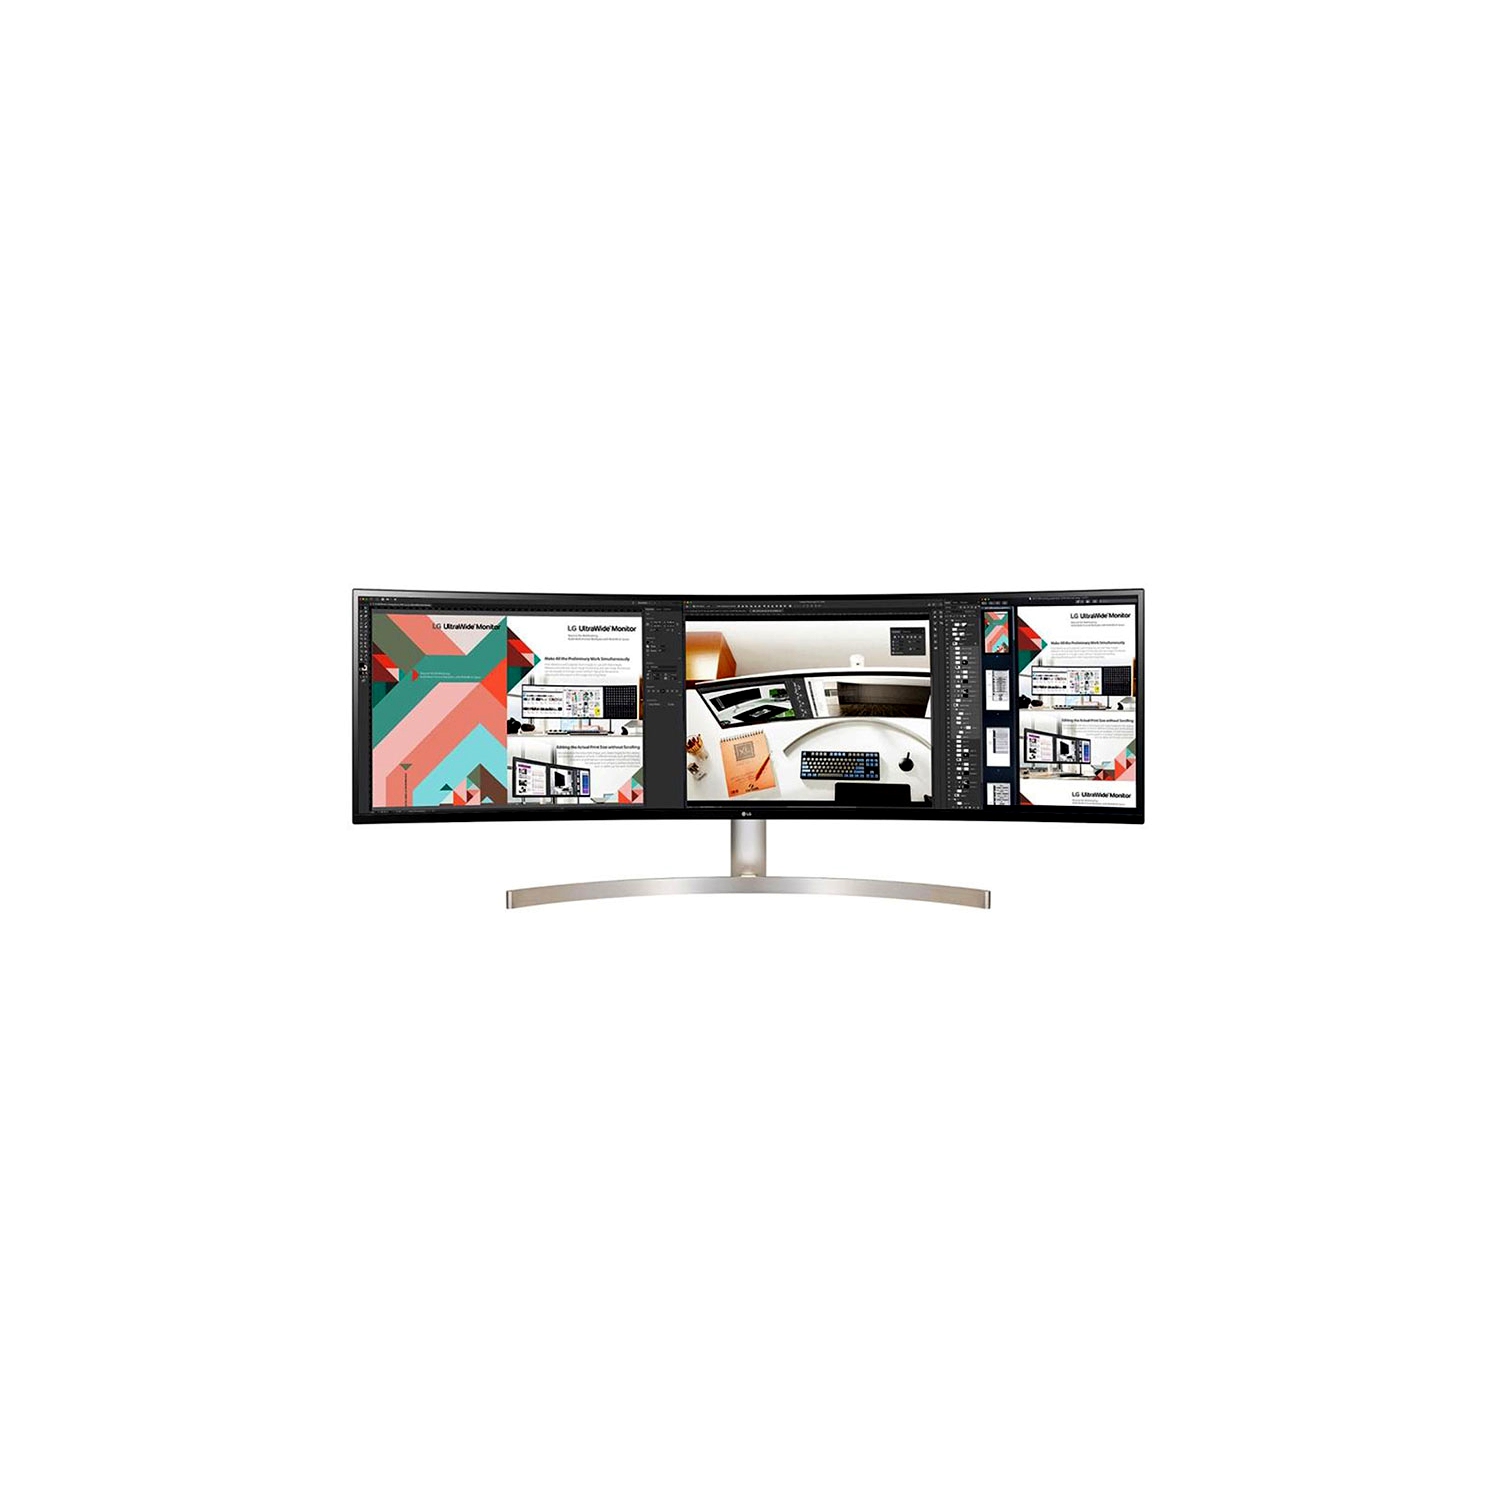 Refurbished (Excellent) - LG 49WL95C-W 49" 32:9 Curved UltraWide HDR IPS Monitor